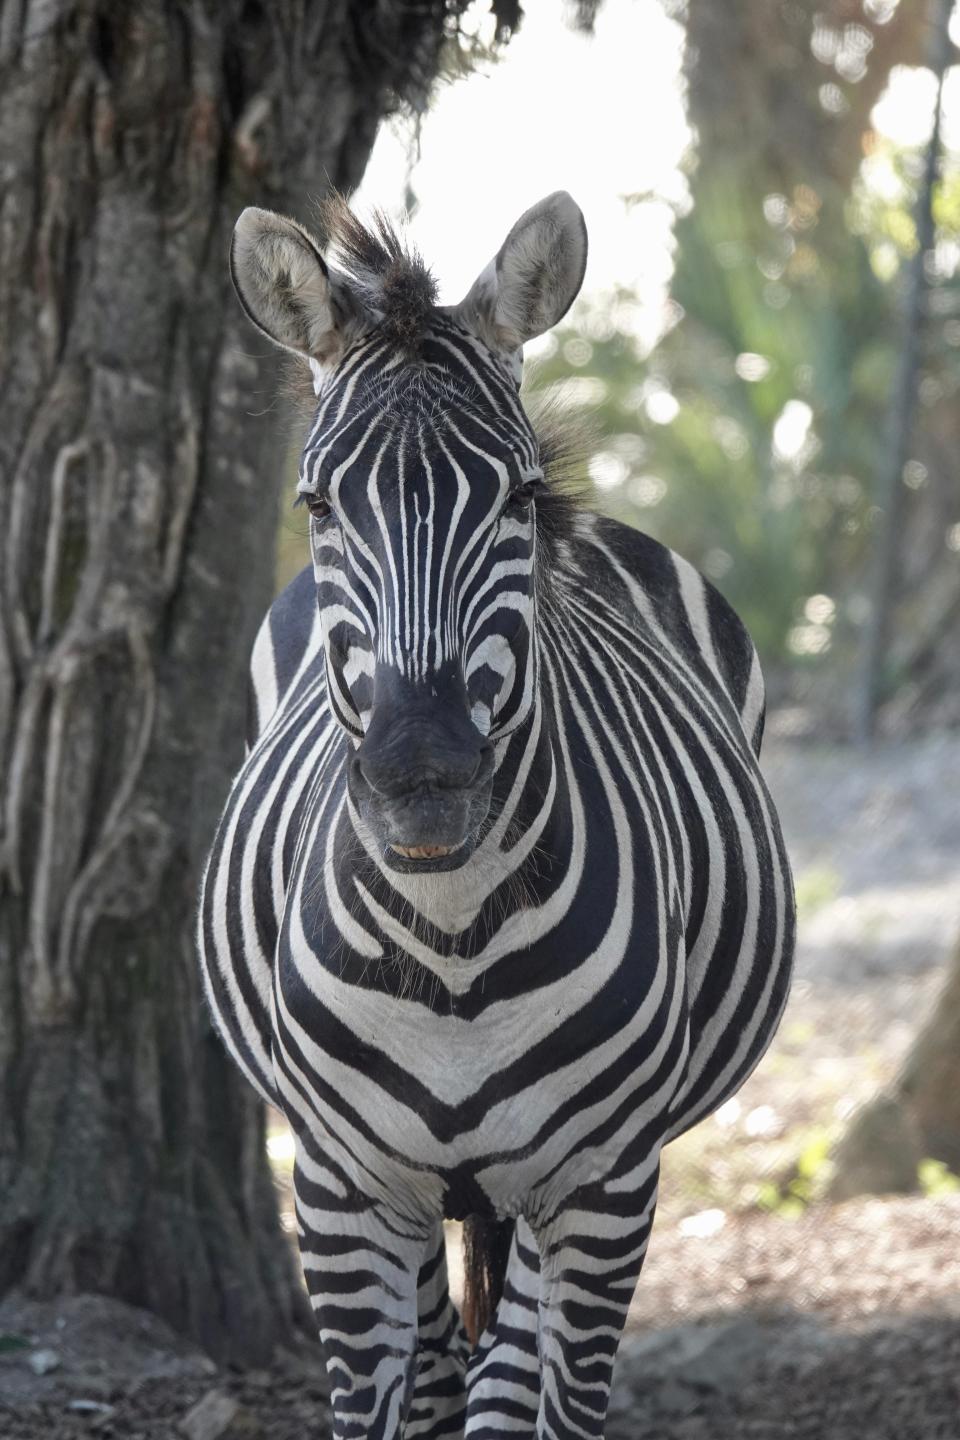 Katrina, a Grant zebra at the Naples Zoo, died Wednesday unexpectedly. She was 18 and had lived in Naples since 2006 after being moved from Louisiana. She was named after the hurricane that struck the Gulf Coast in 2005, the year she was born.